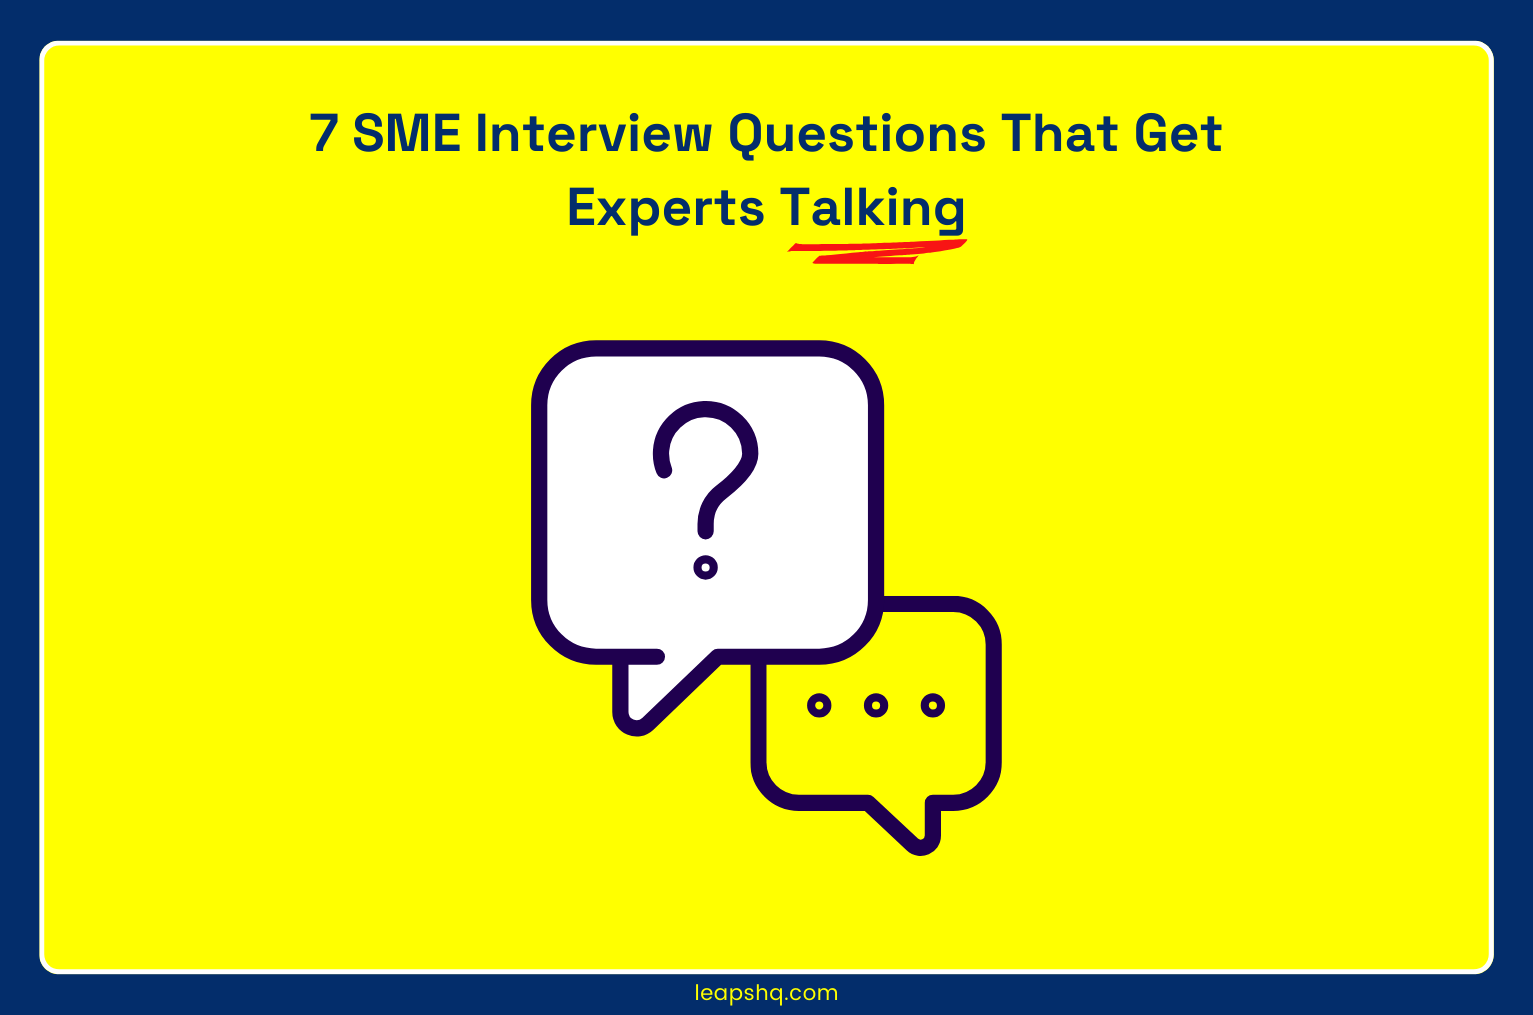 7 SME Interview Questions That Get Experts Talking